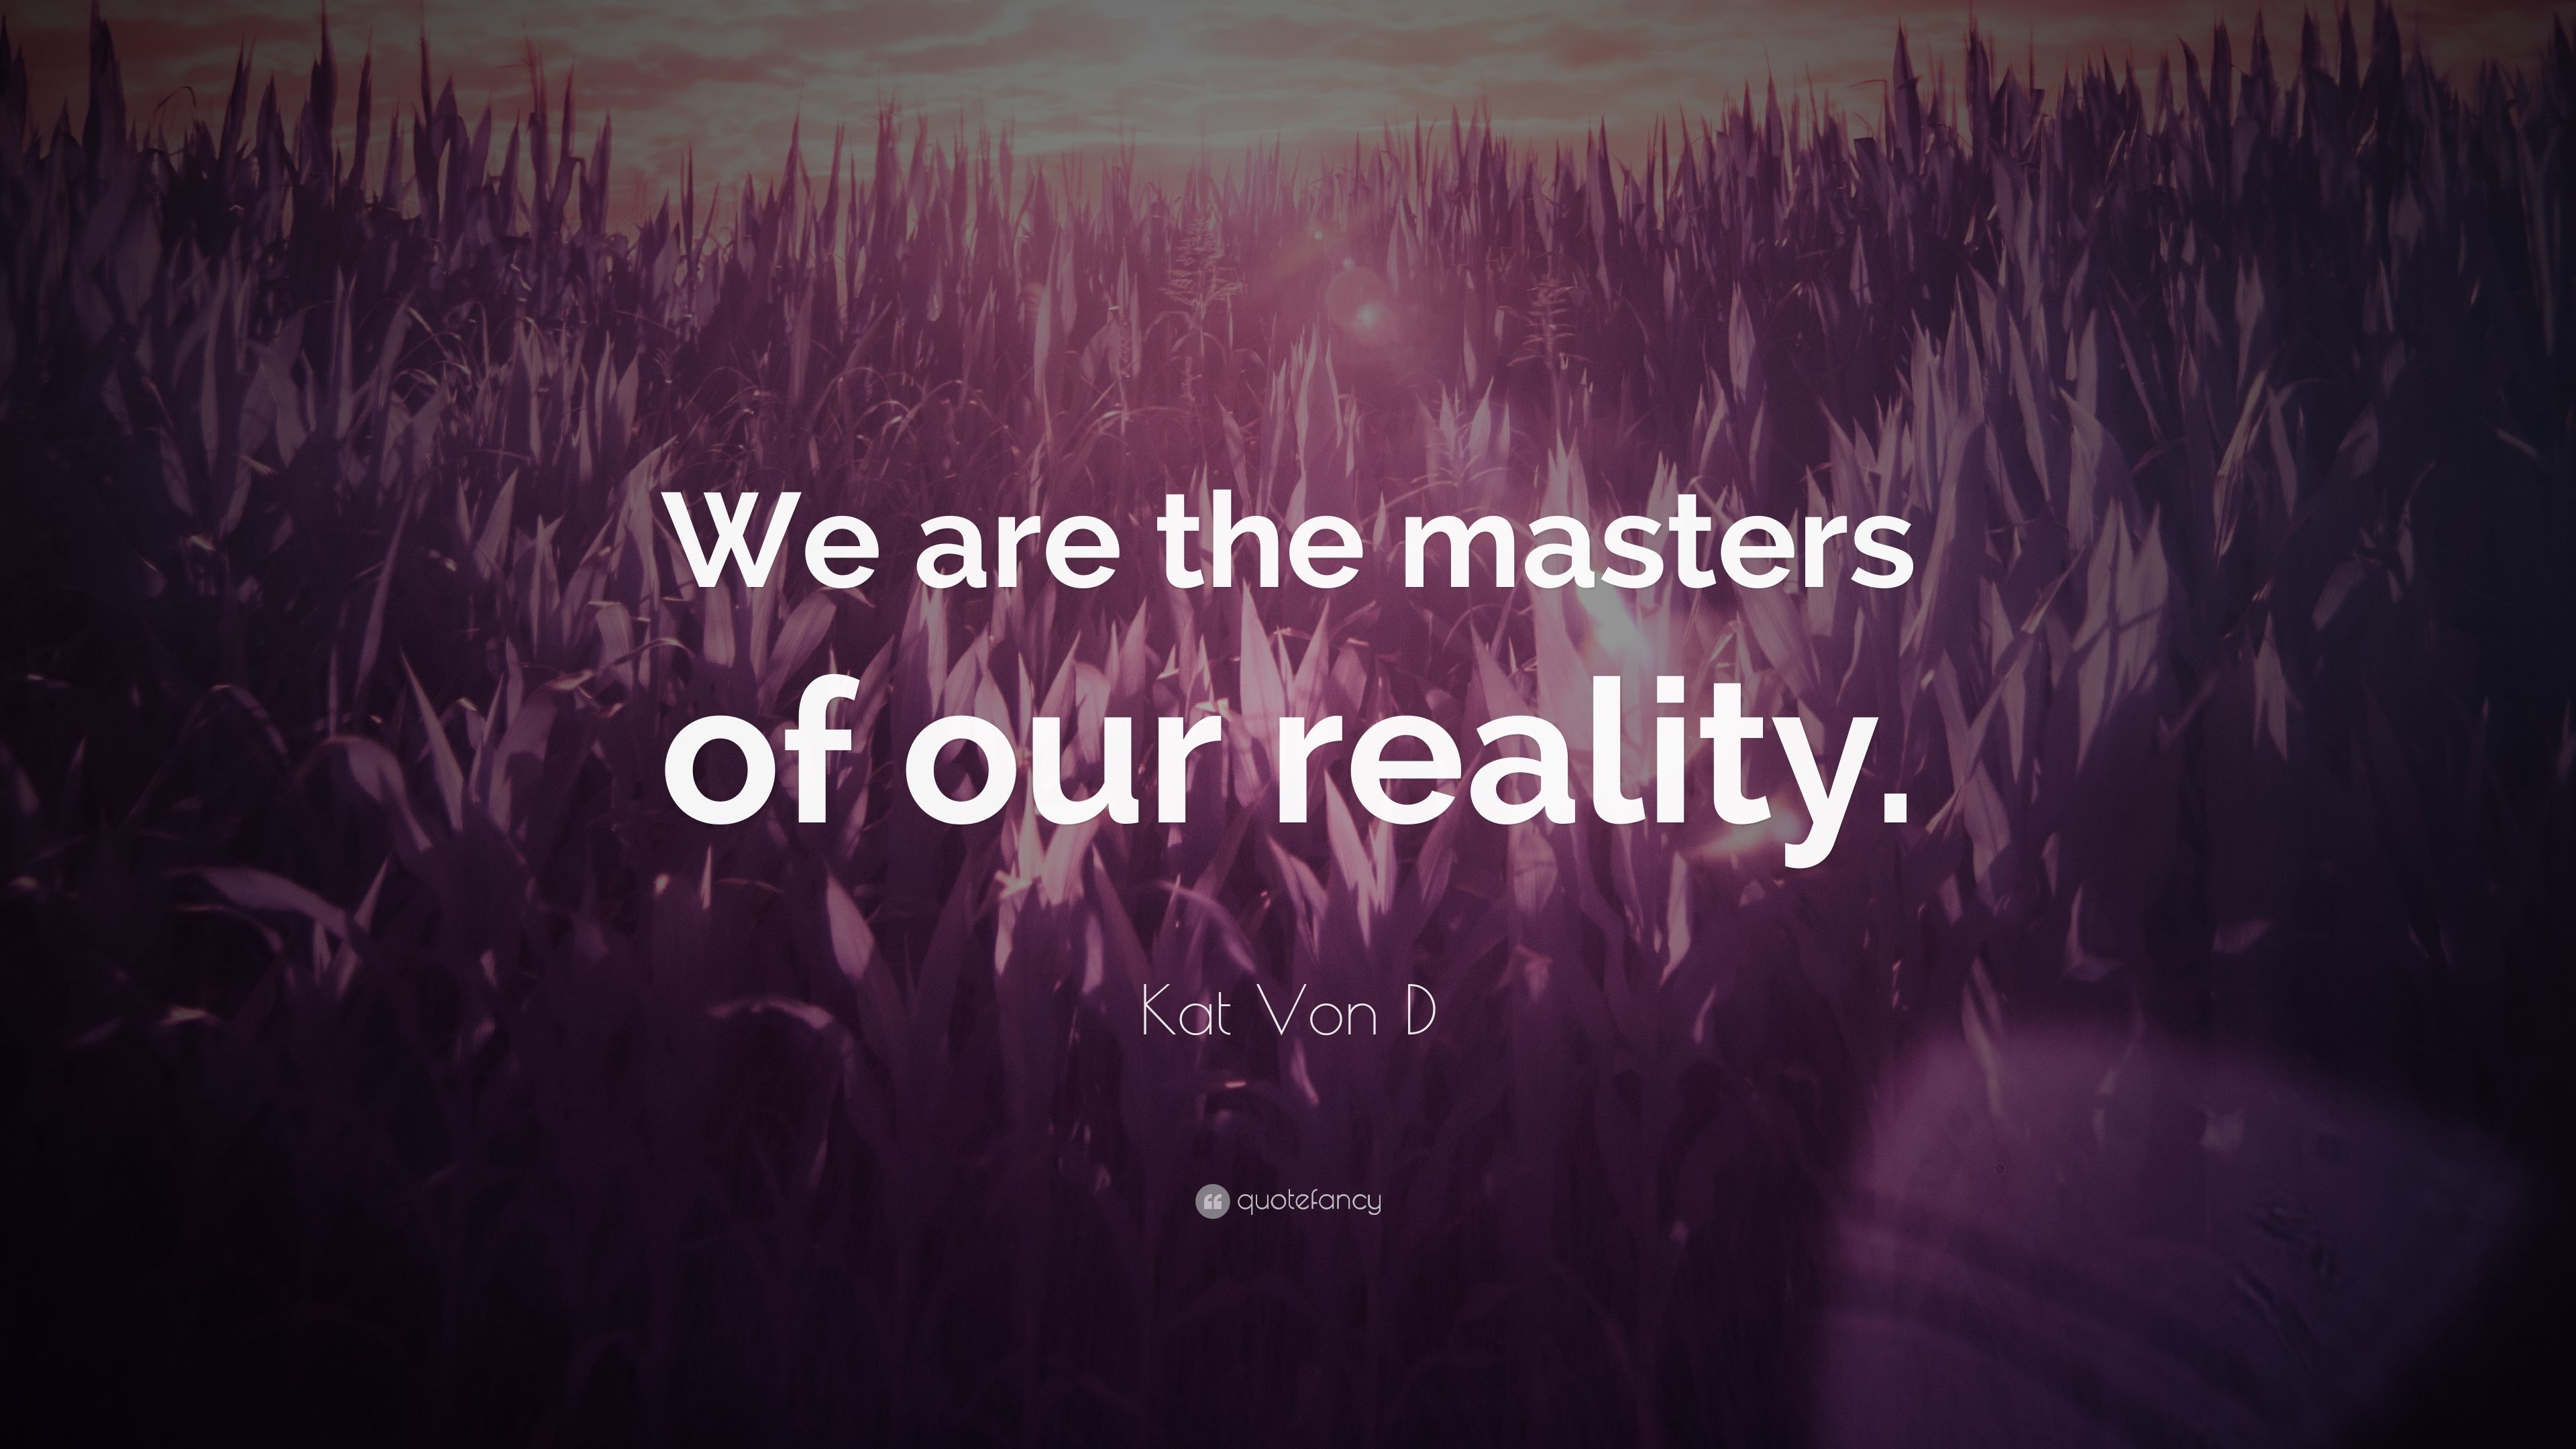 3840x2160 Kat Von D Quote: “We are the masters of our reality.”